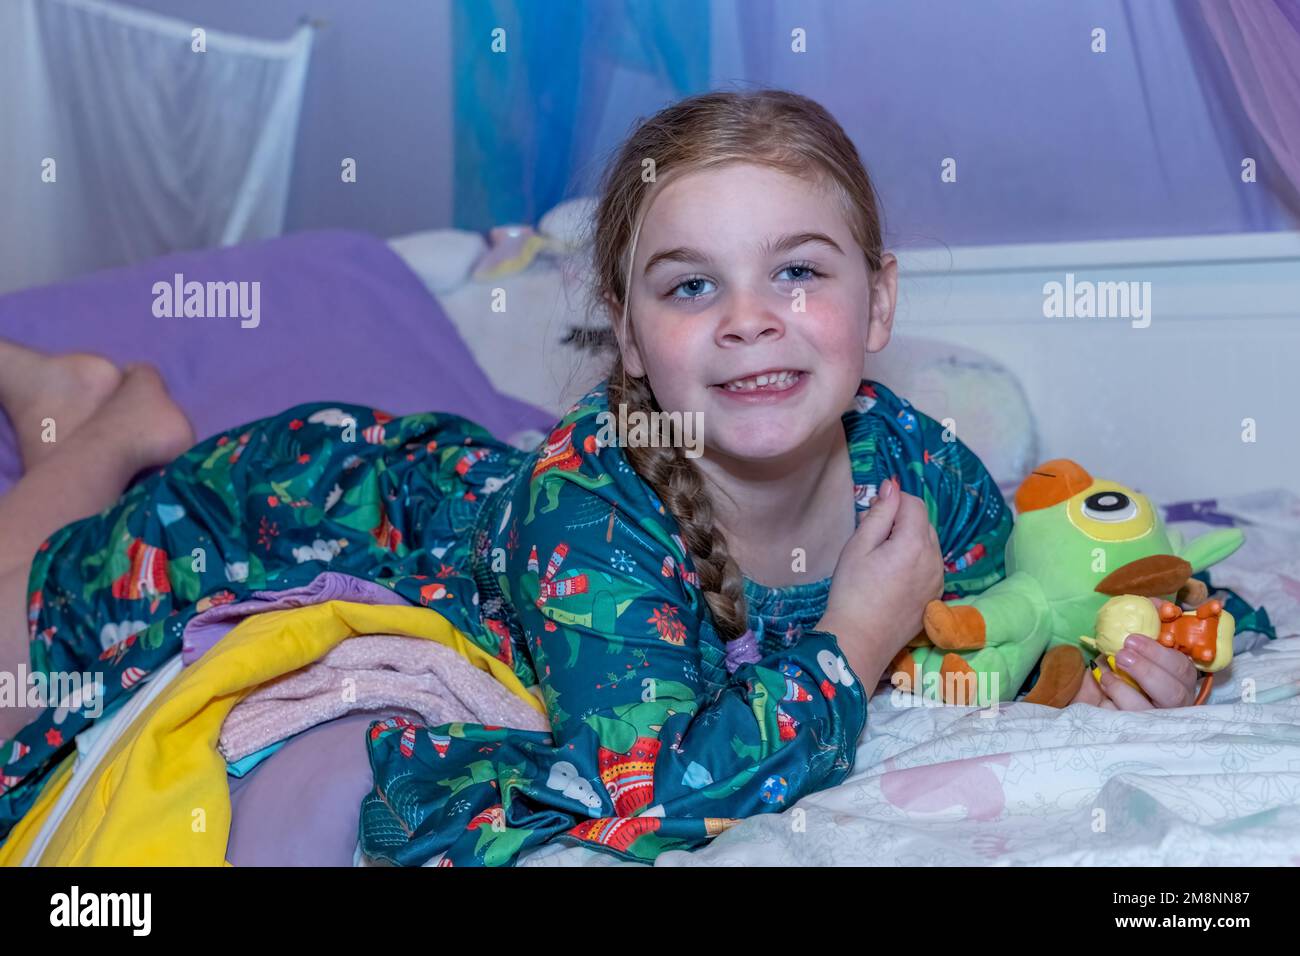 Smiling six year old girl missing front teeth lying on her bed with her stuffed animals. Stock Photo